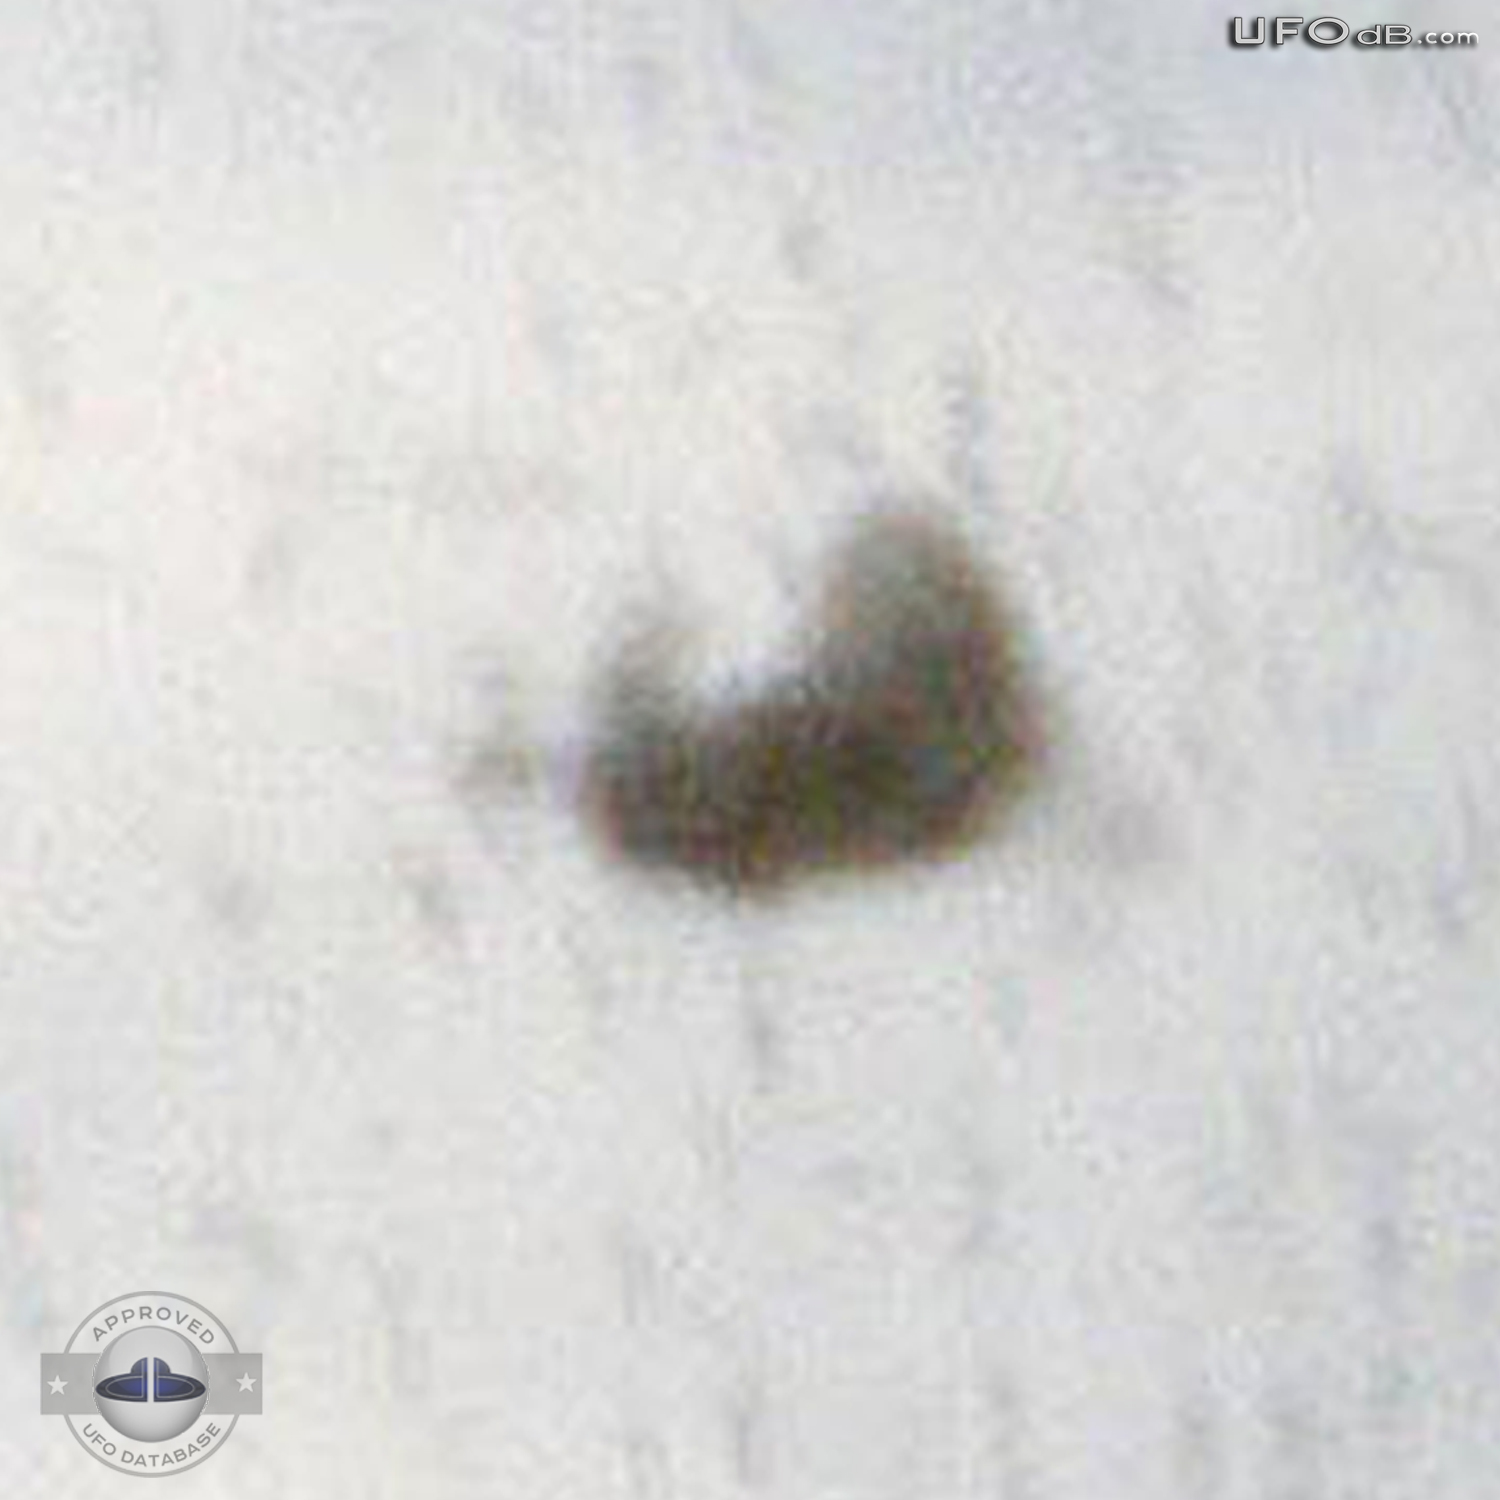 Cloaking UFO near wing of flying Airplane in Australia | January 2011 UFO Picture #243-5